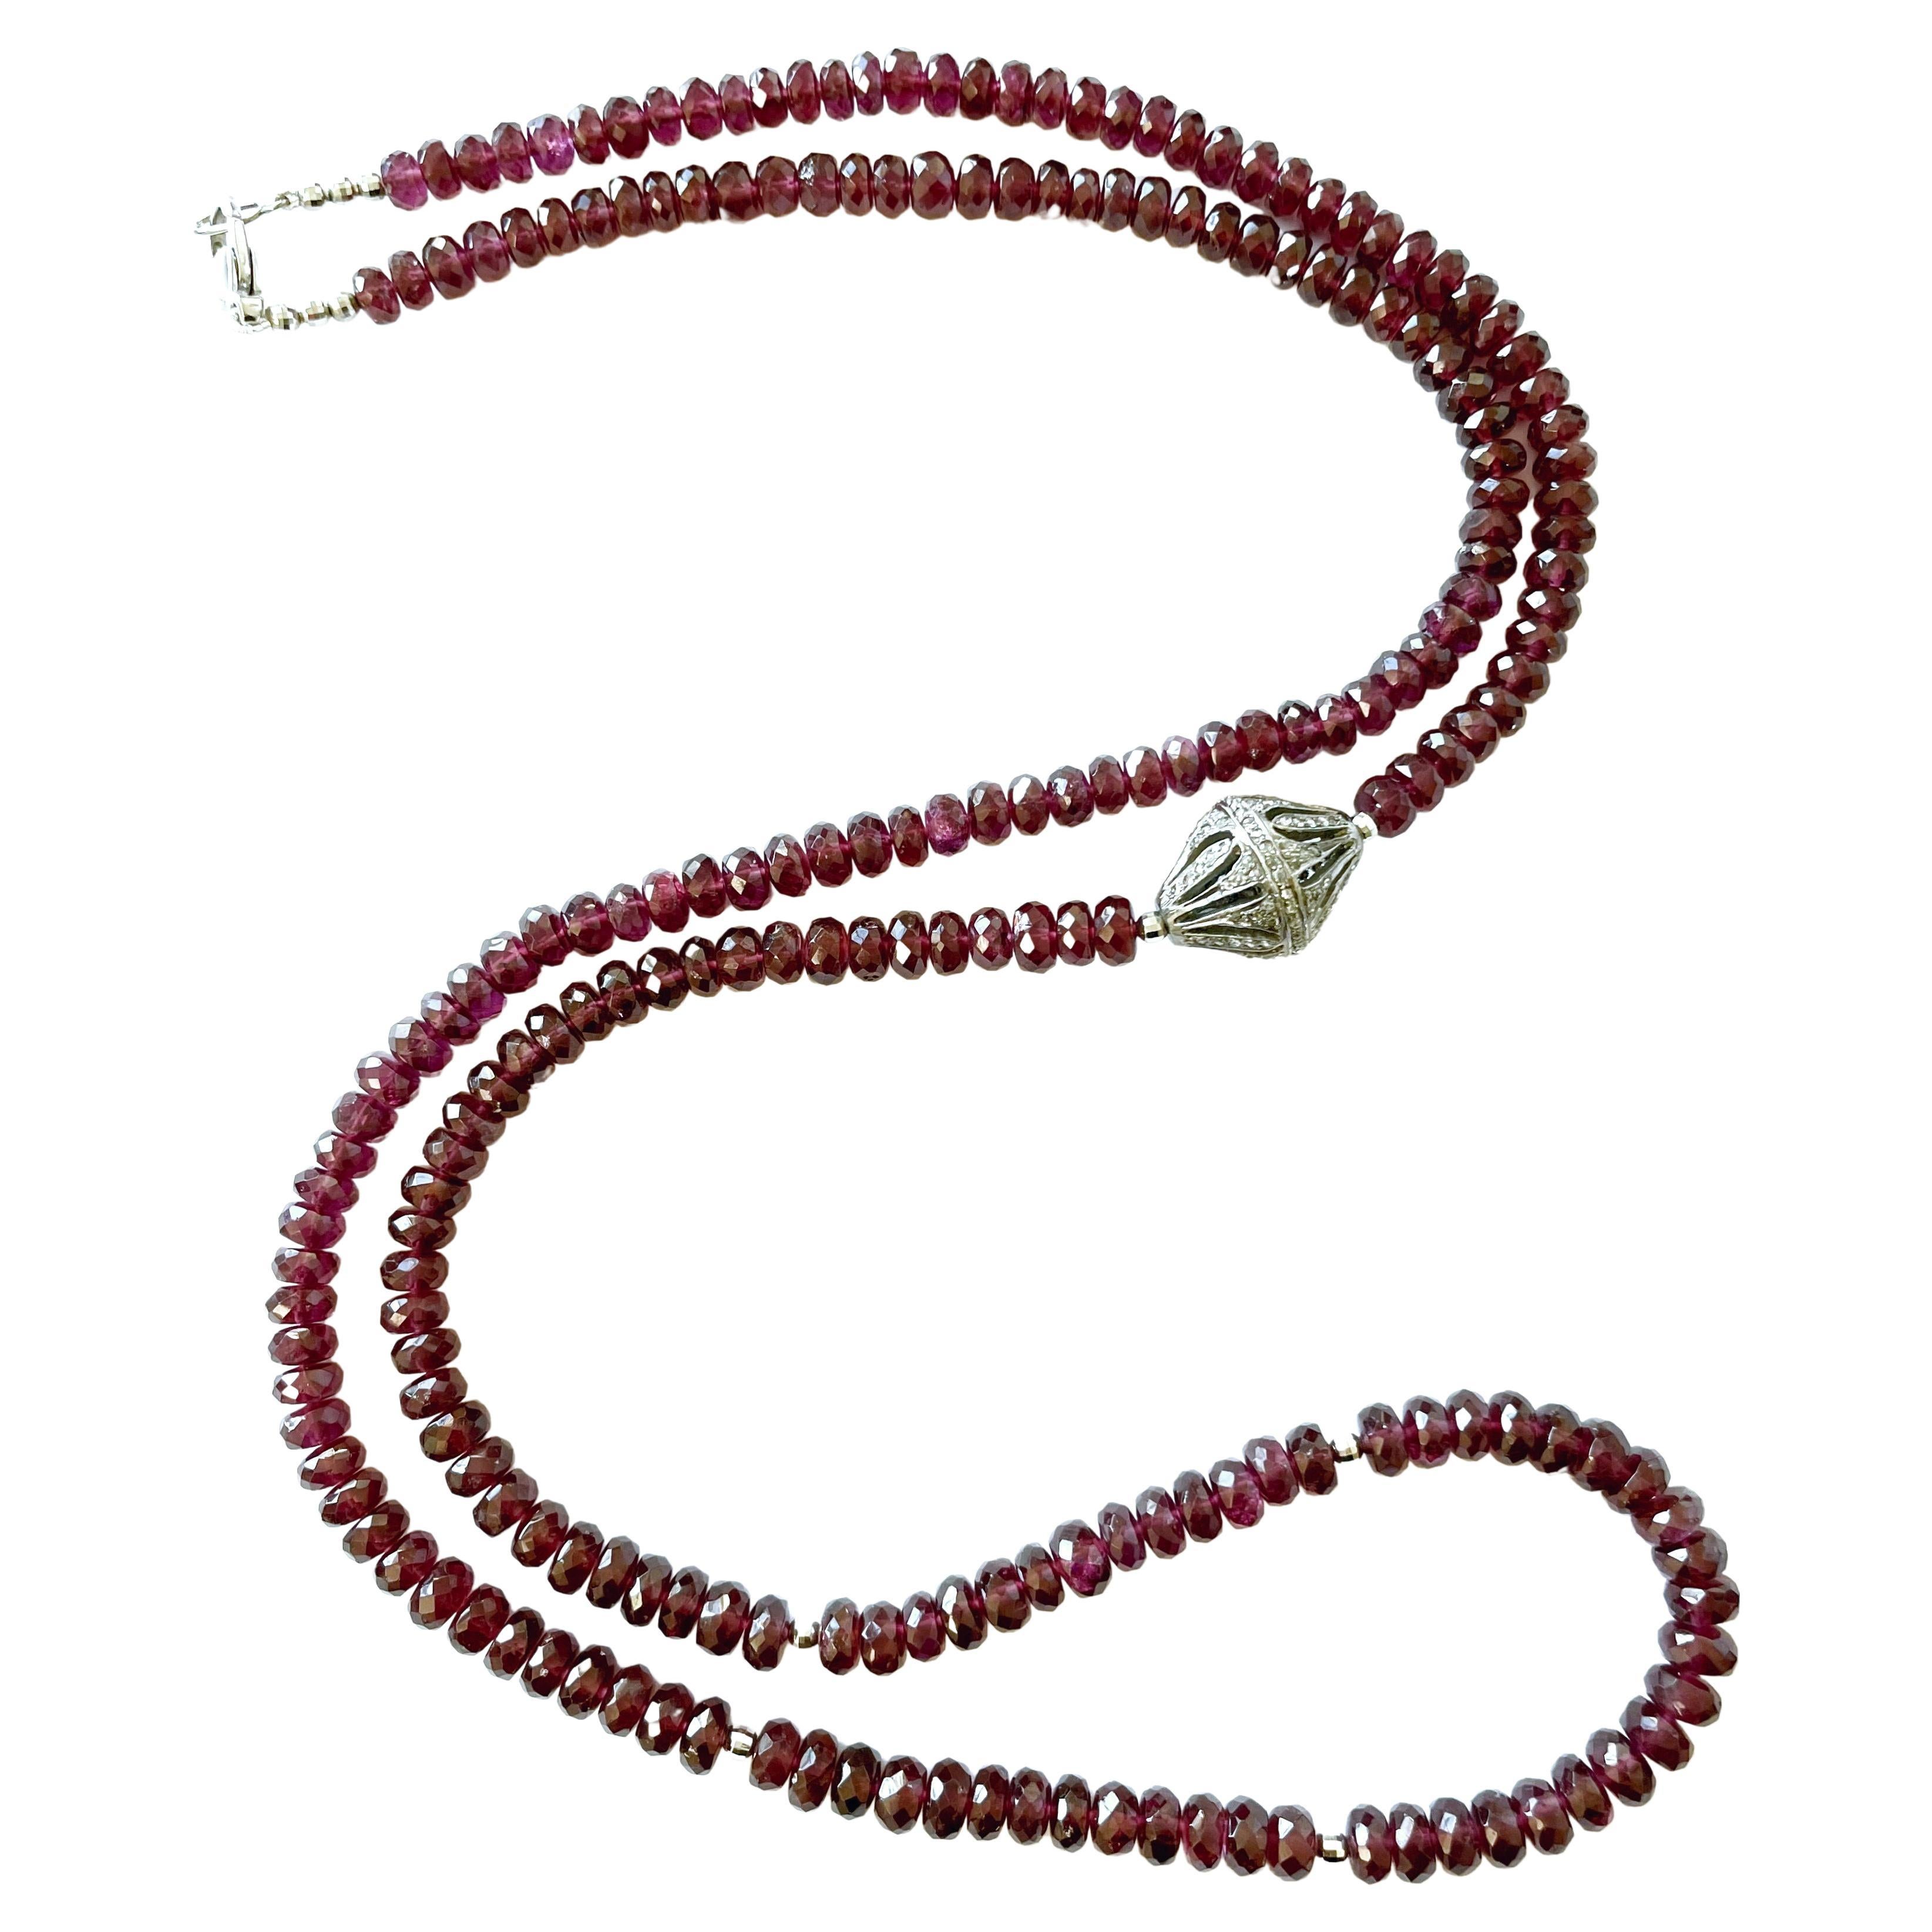 373 Carats Rhodolite Garnet with Large Pave Diamond Bead Necklace